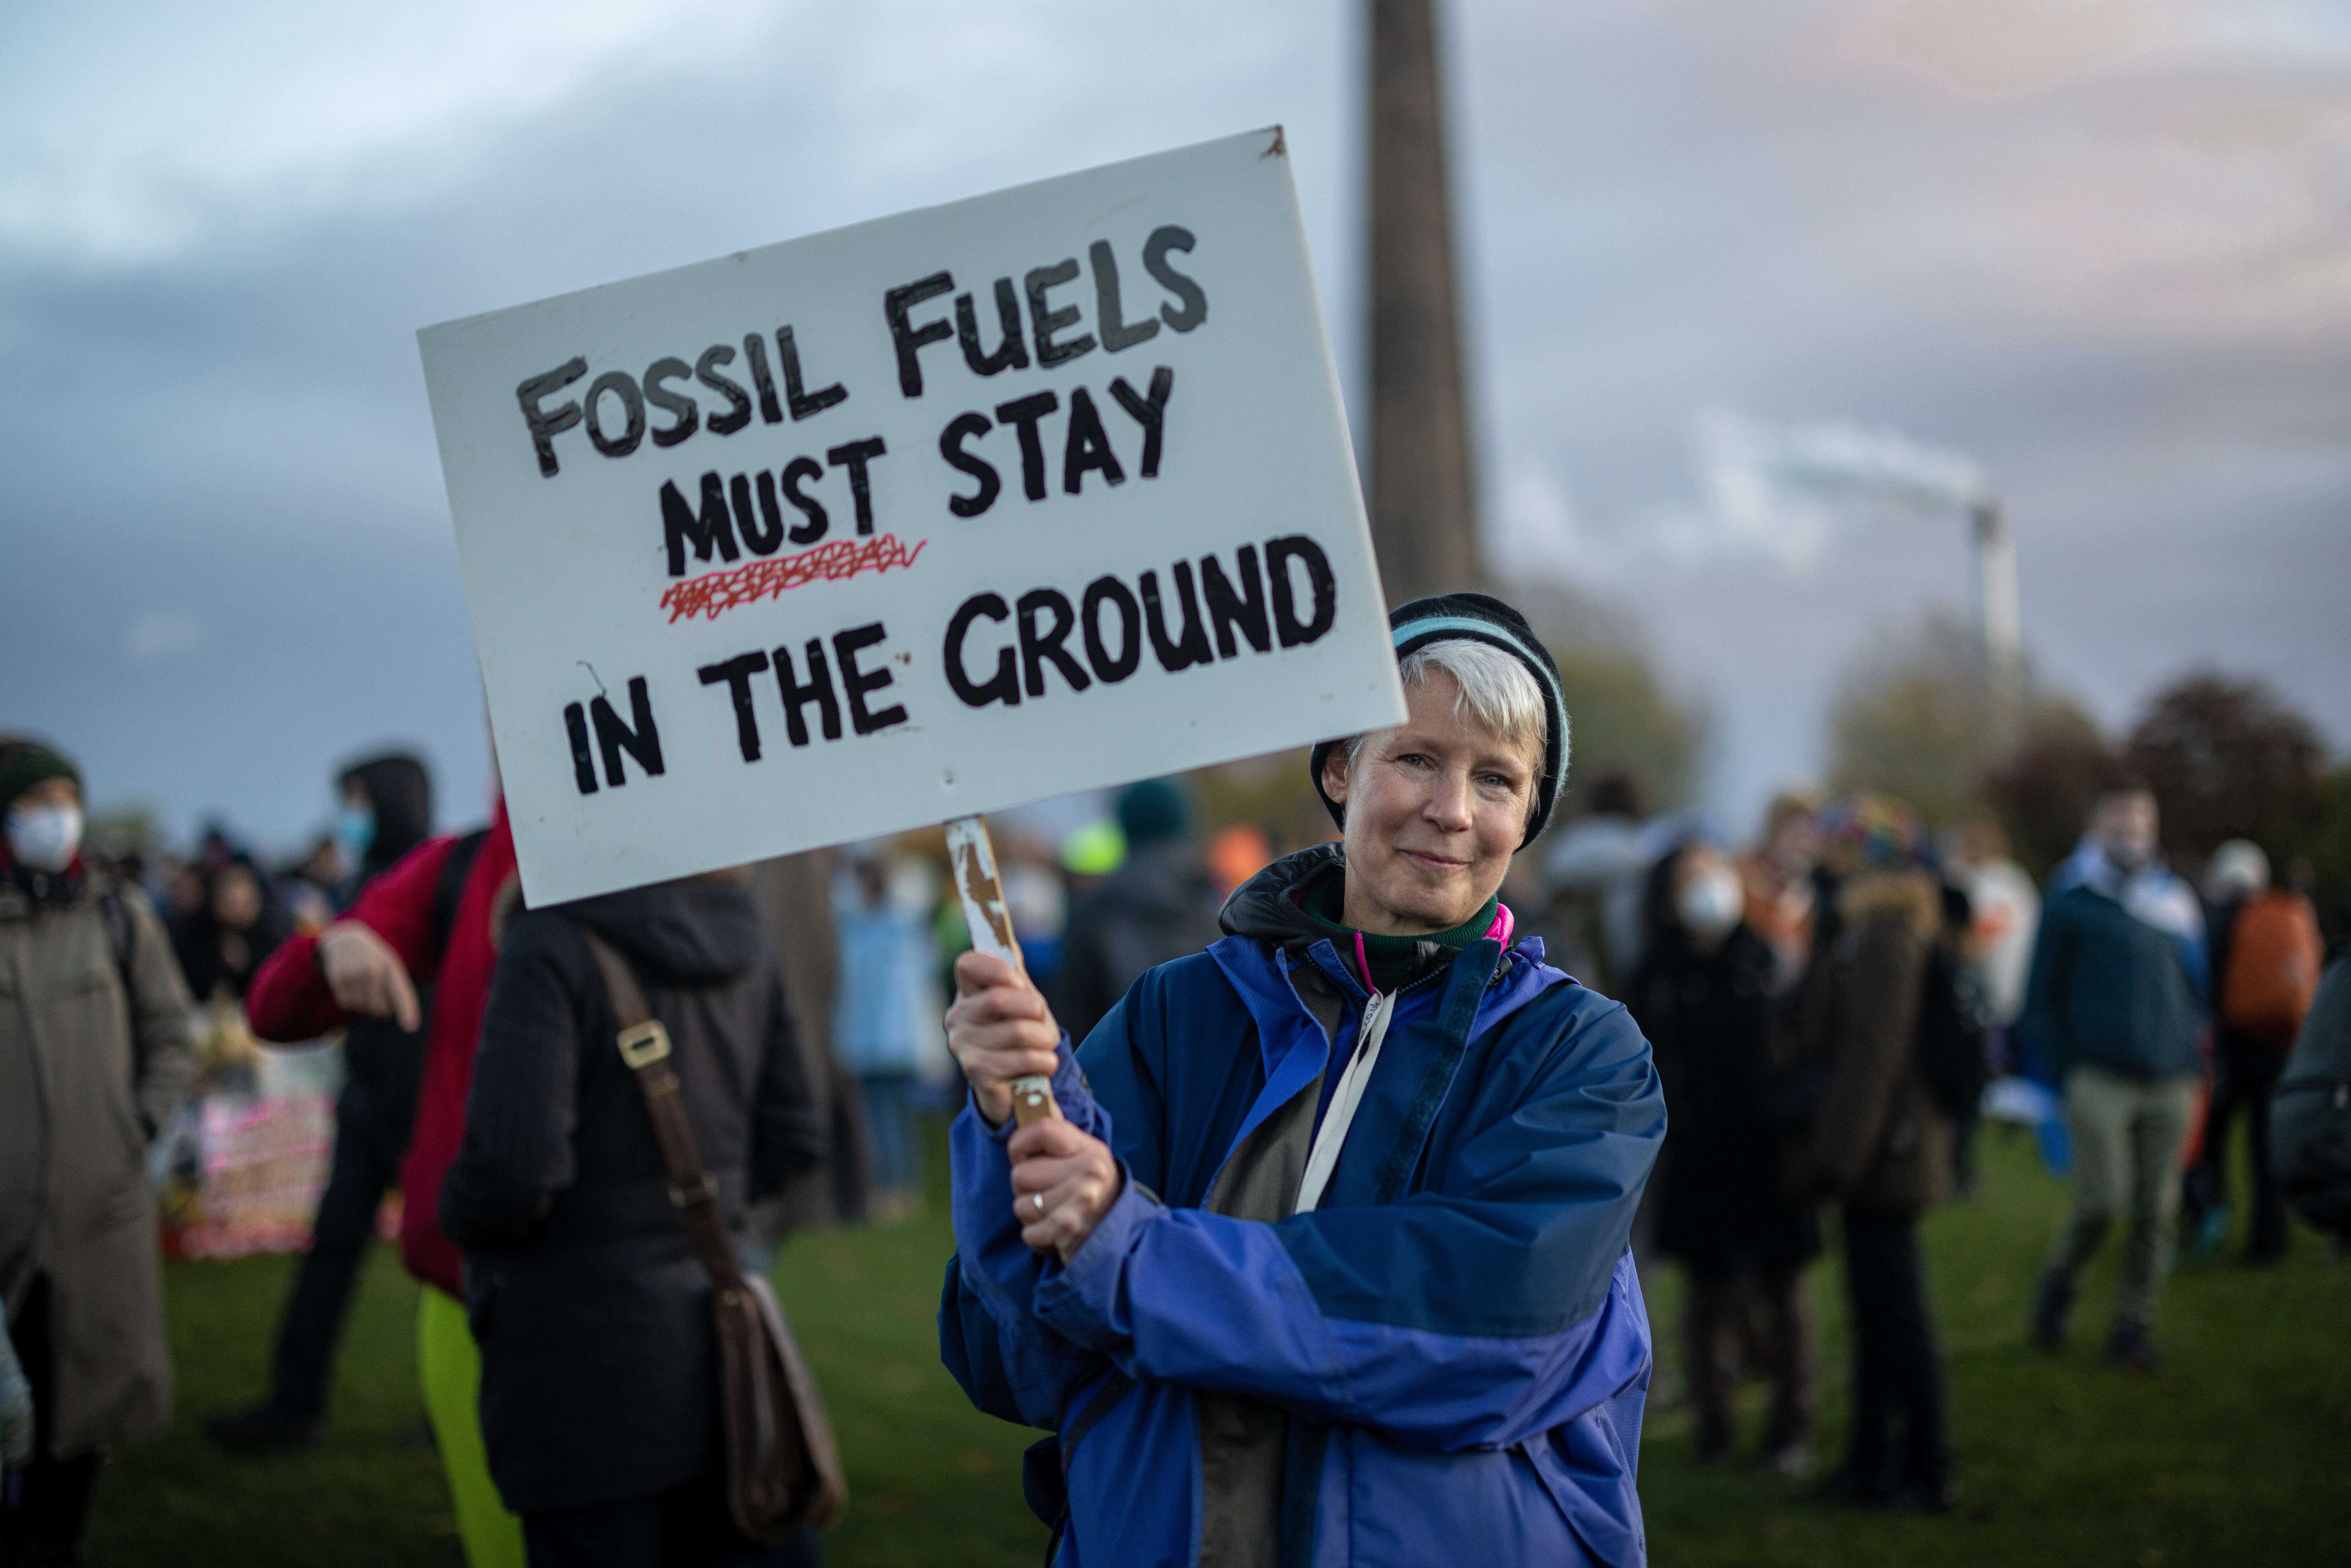 The destruction caused by our addiction to fossil fuels is clearer than ever